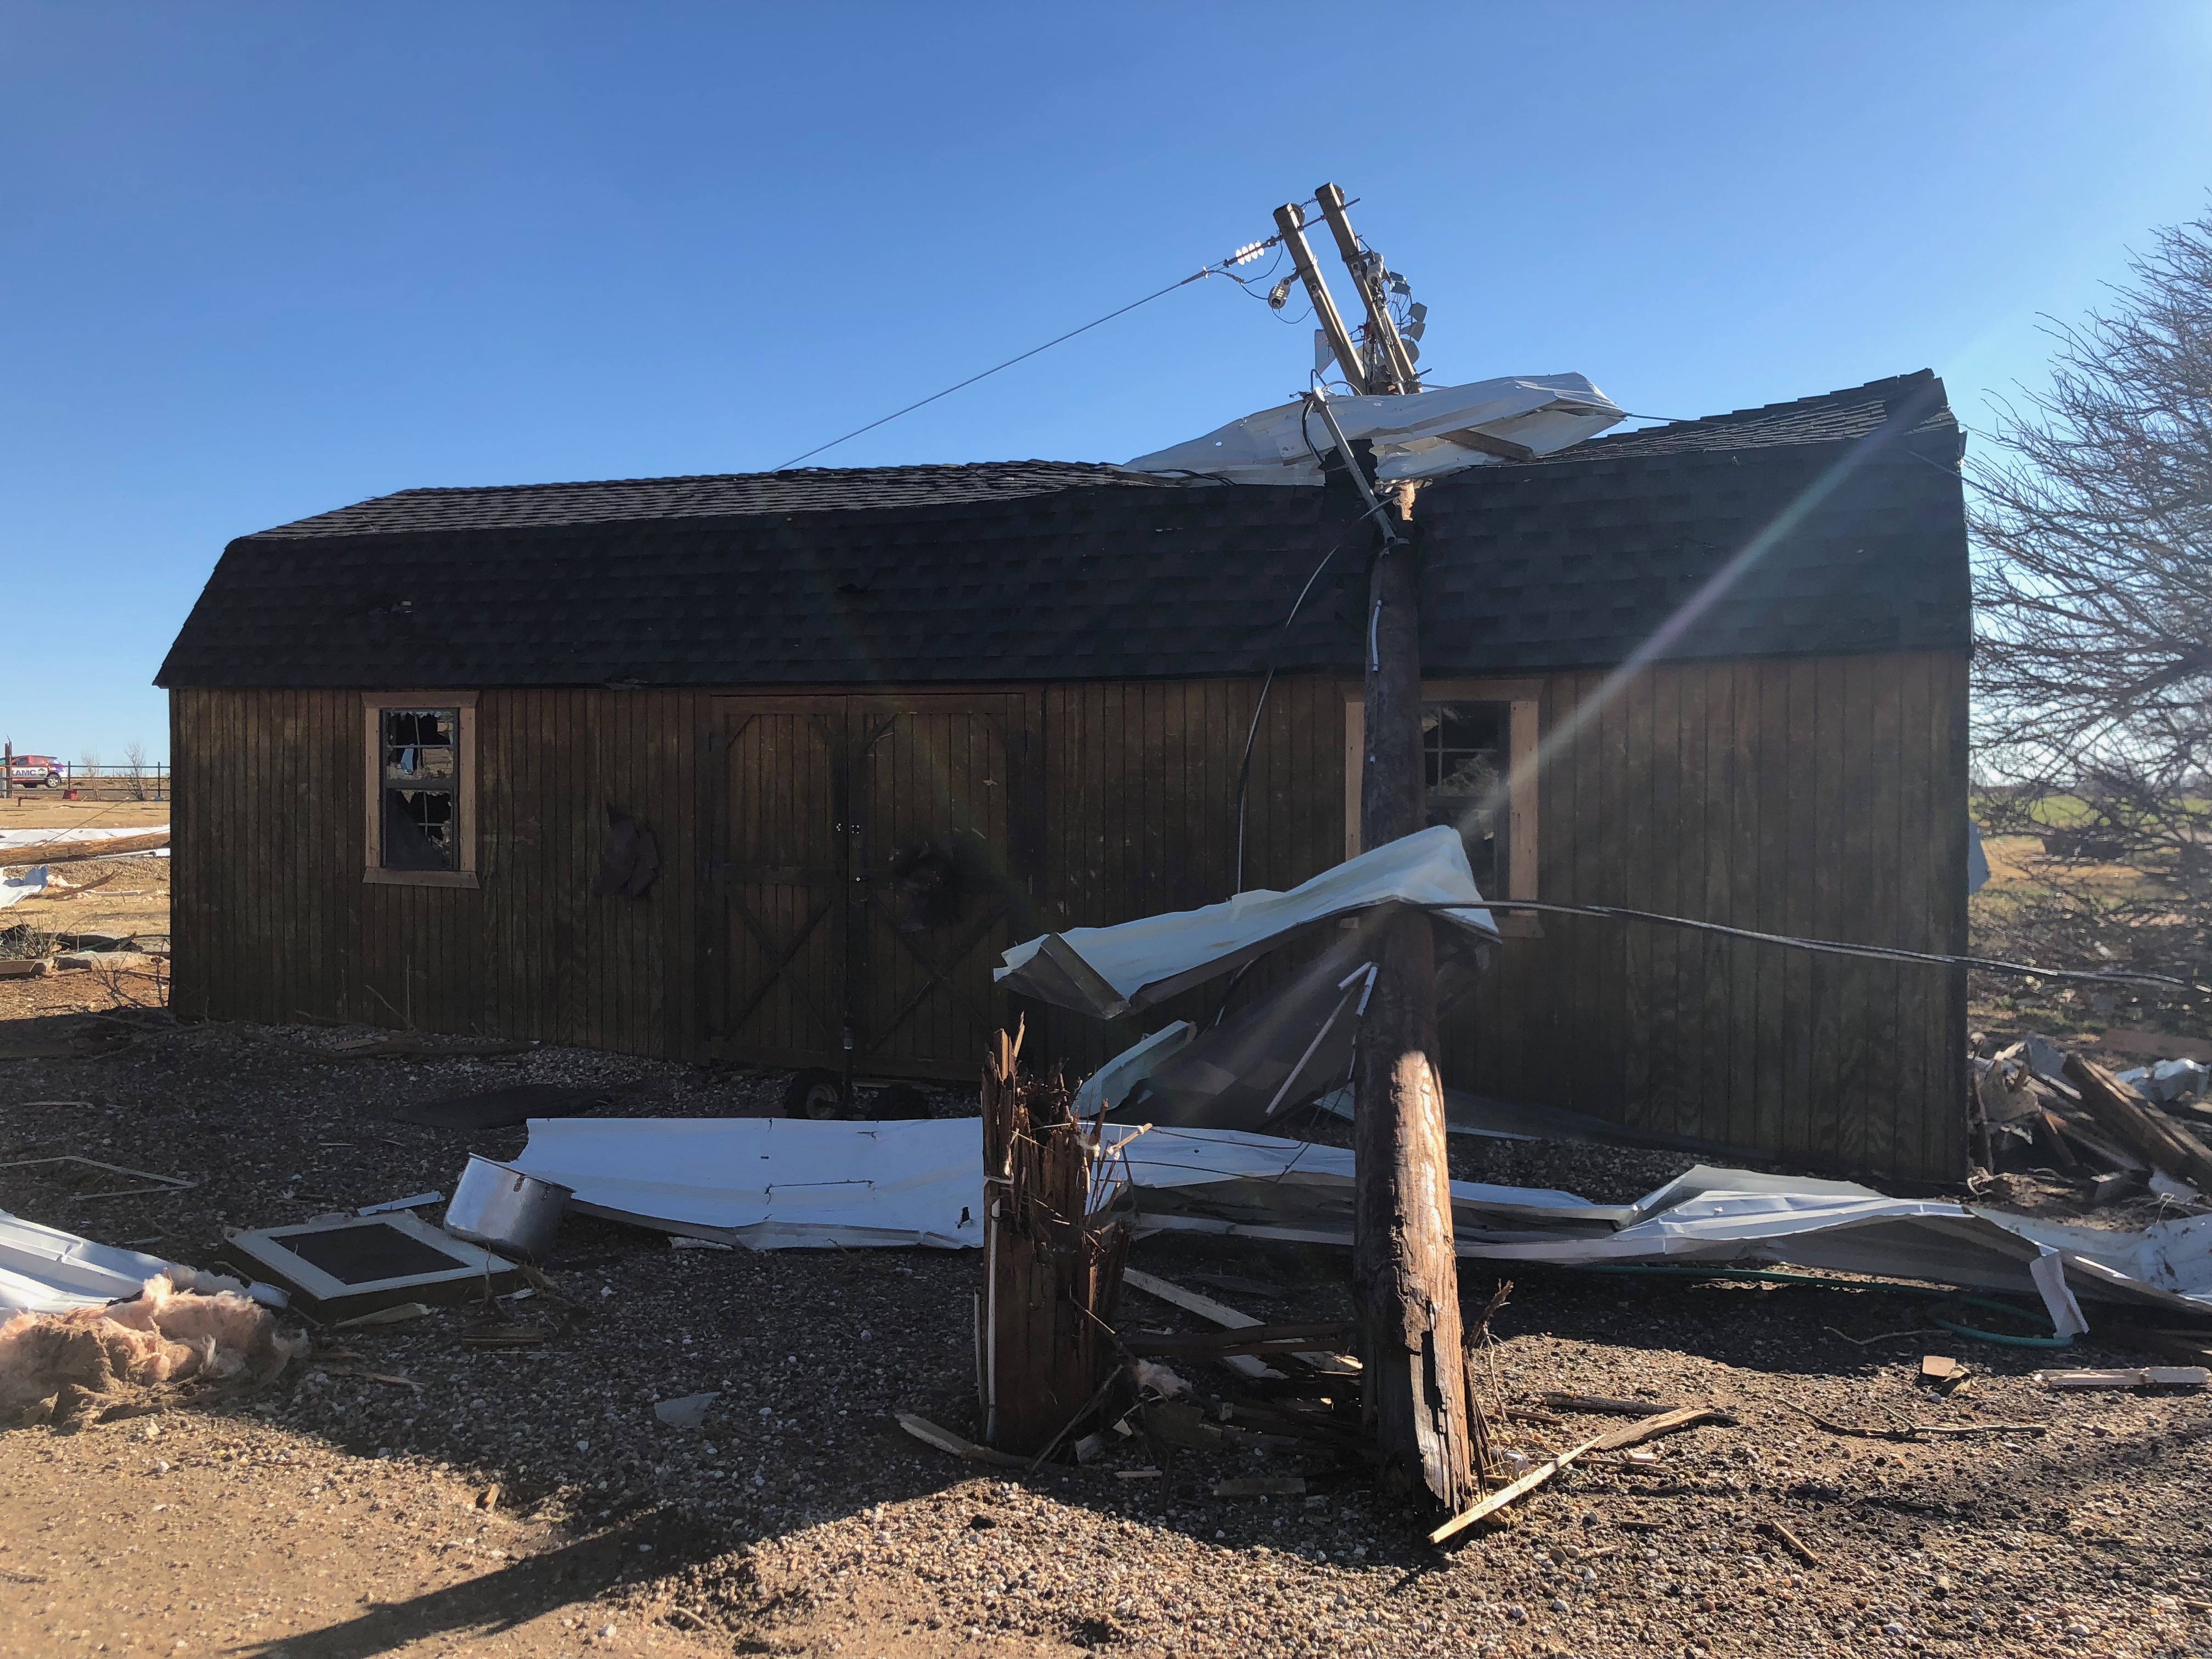 View of the tornado damage that occurred to a homestead just east of Anton on the evening of 12 March 2019. The picture was taken the following morning by Marissa Pazos.